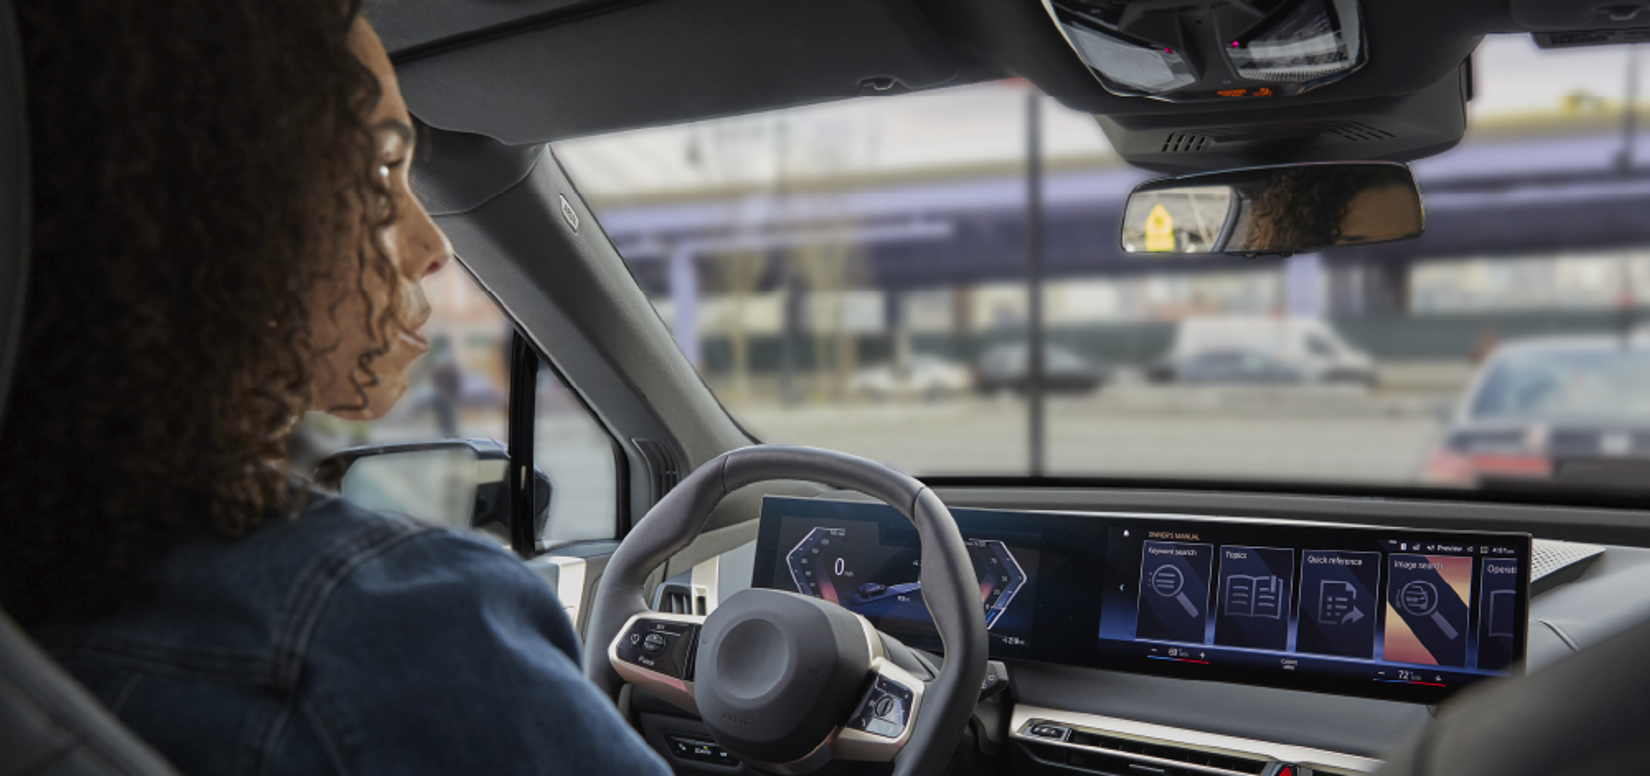 ADAS features like adaptive cruise control and lane-keep assist combine to form advanced highway assist systems.